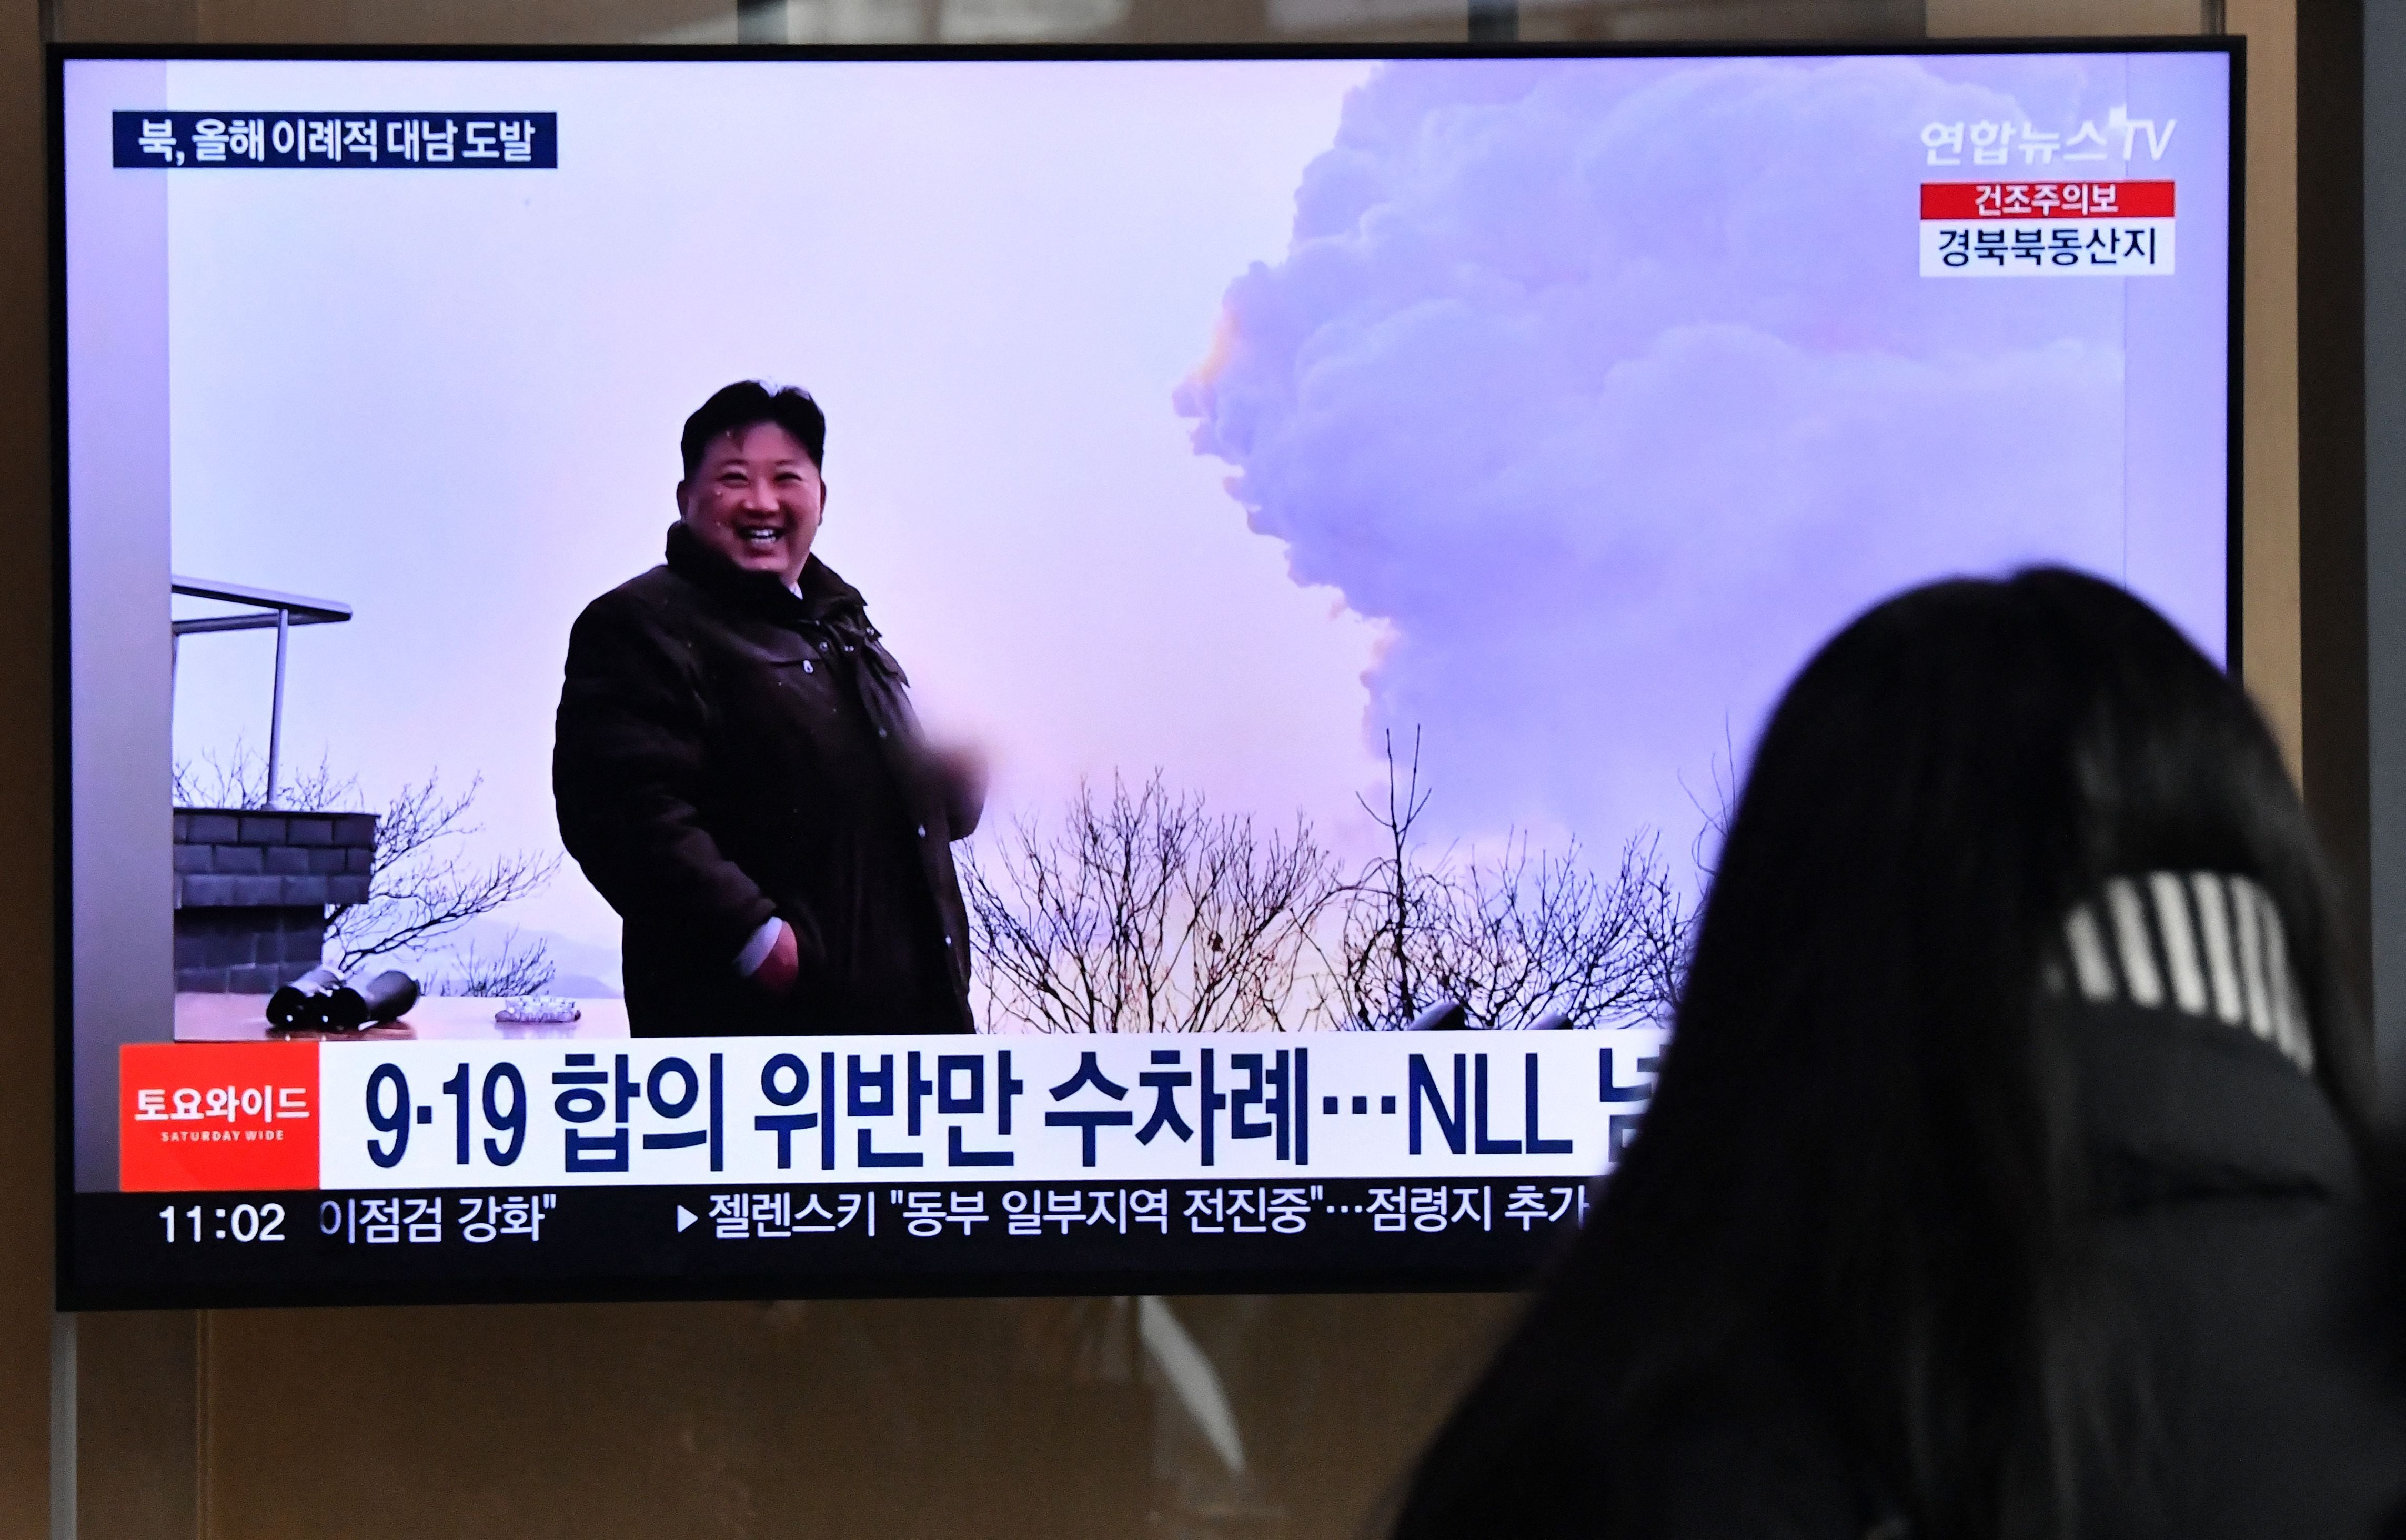 File. A woman watches a television screen showing a news broadcast with file footage of North Korean leader Kim Jong Un, at a railway station in Seoul on 31 December 2022 after North Korea fired three short-range ballistic missiles according to South Korea's military